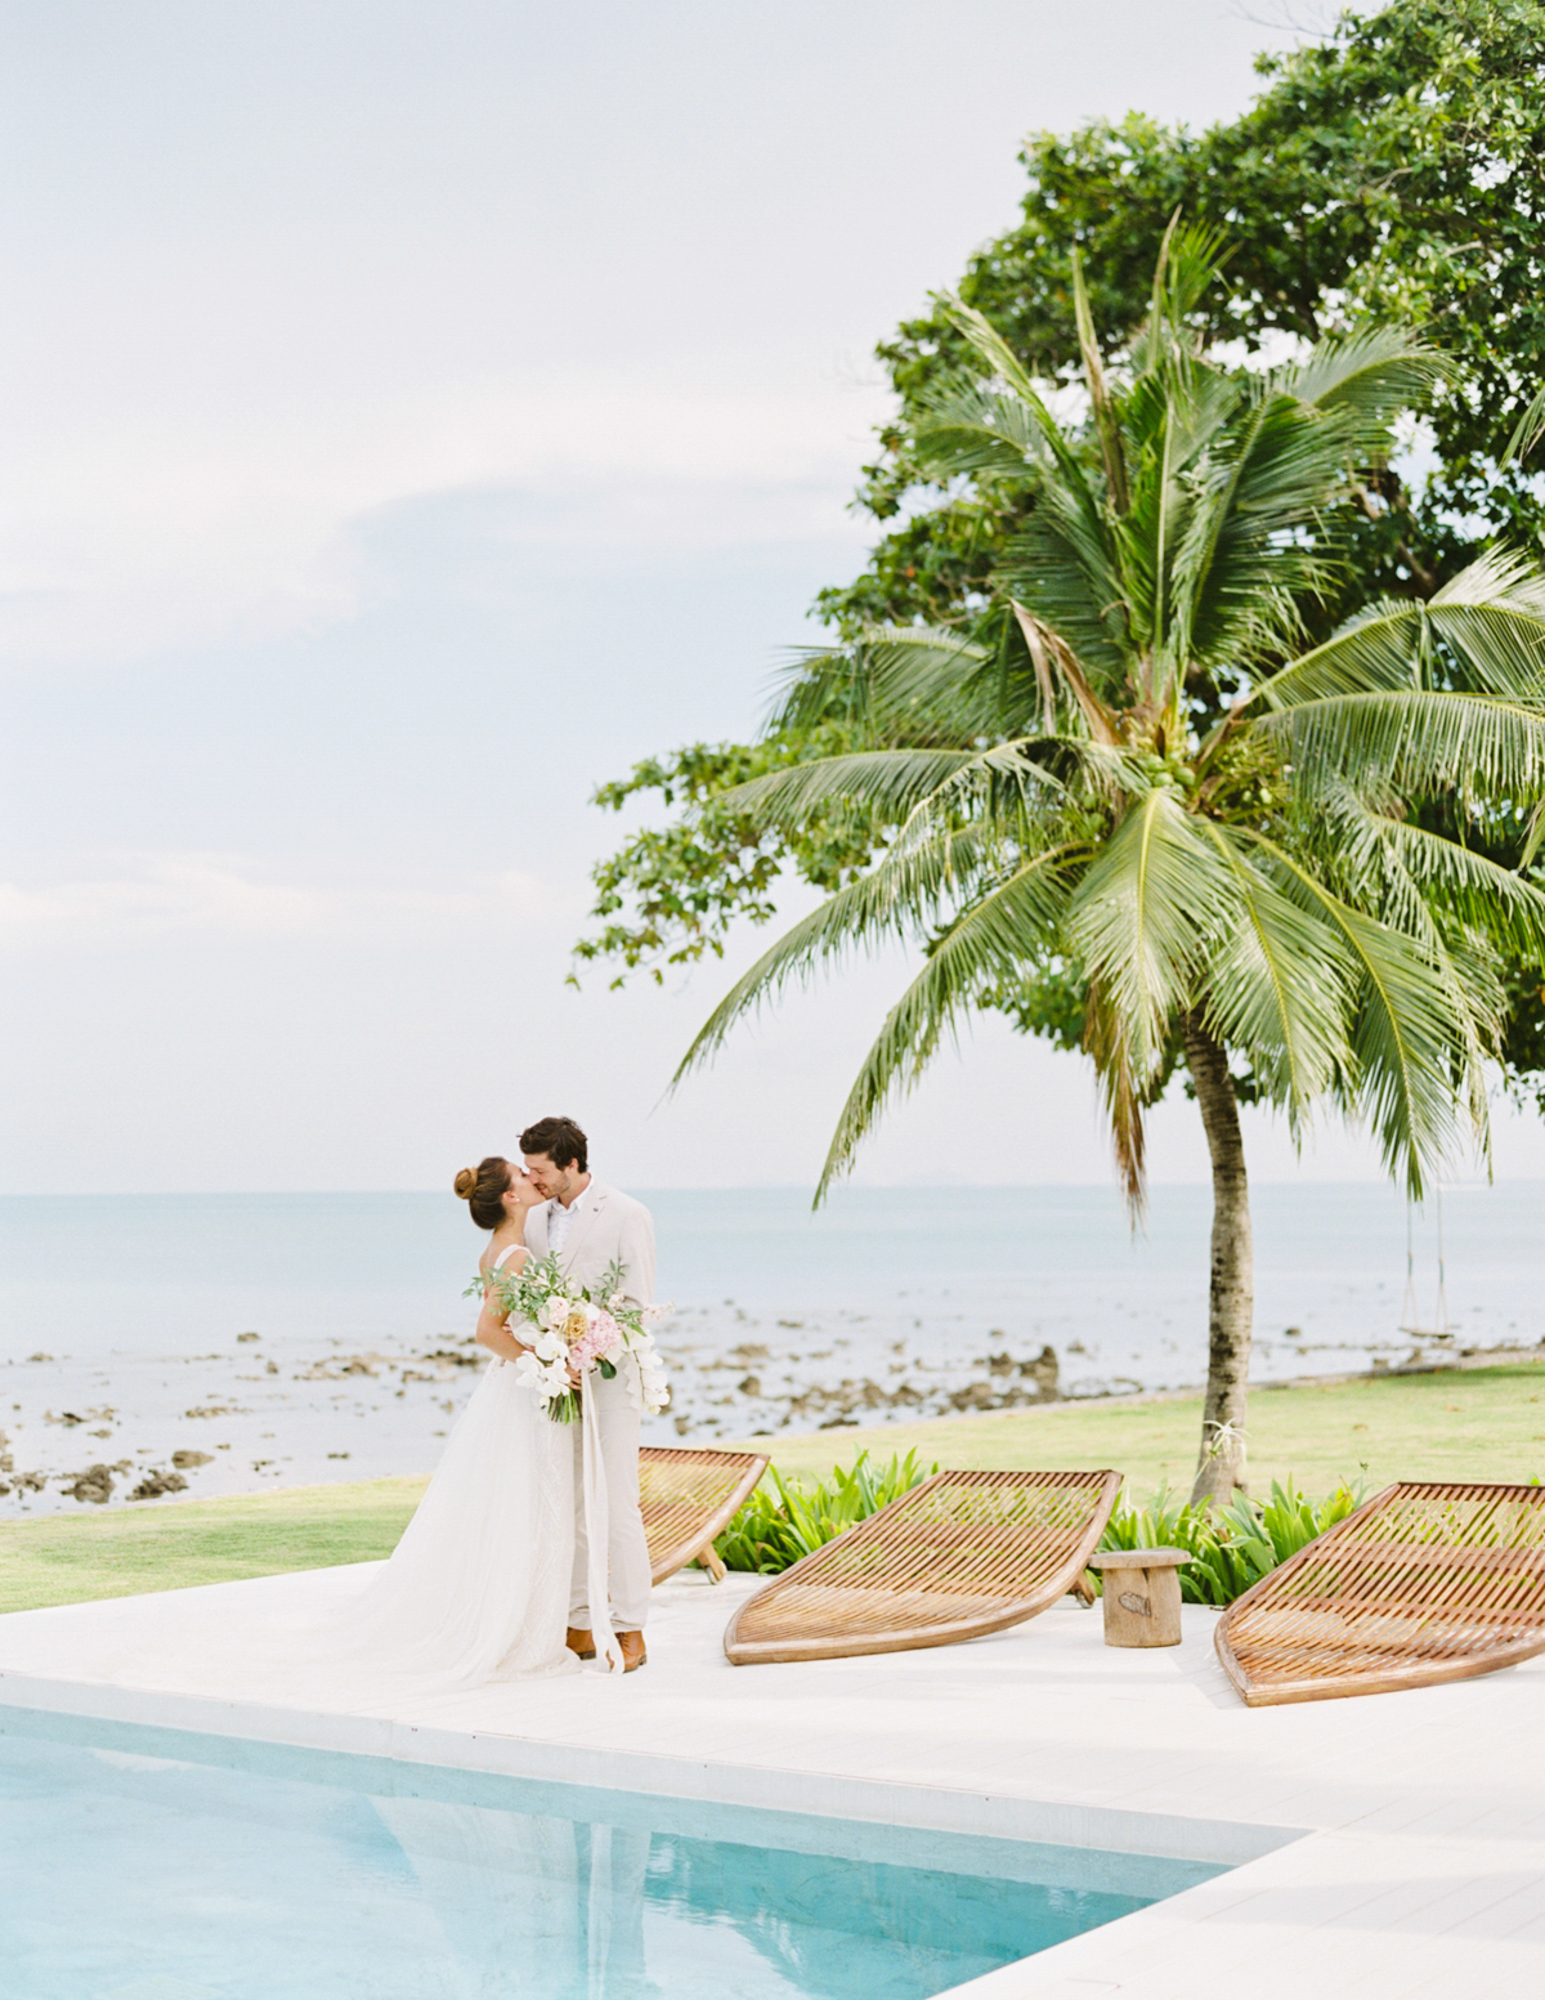 Bride and groom photos for elopement on the luxury island Kph Yao Noi phuket in Thailand